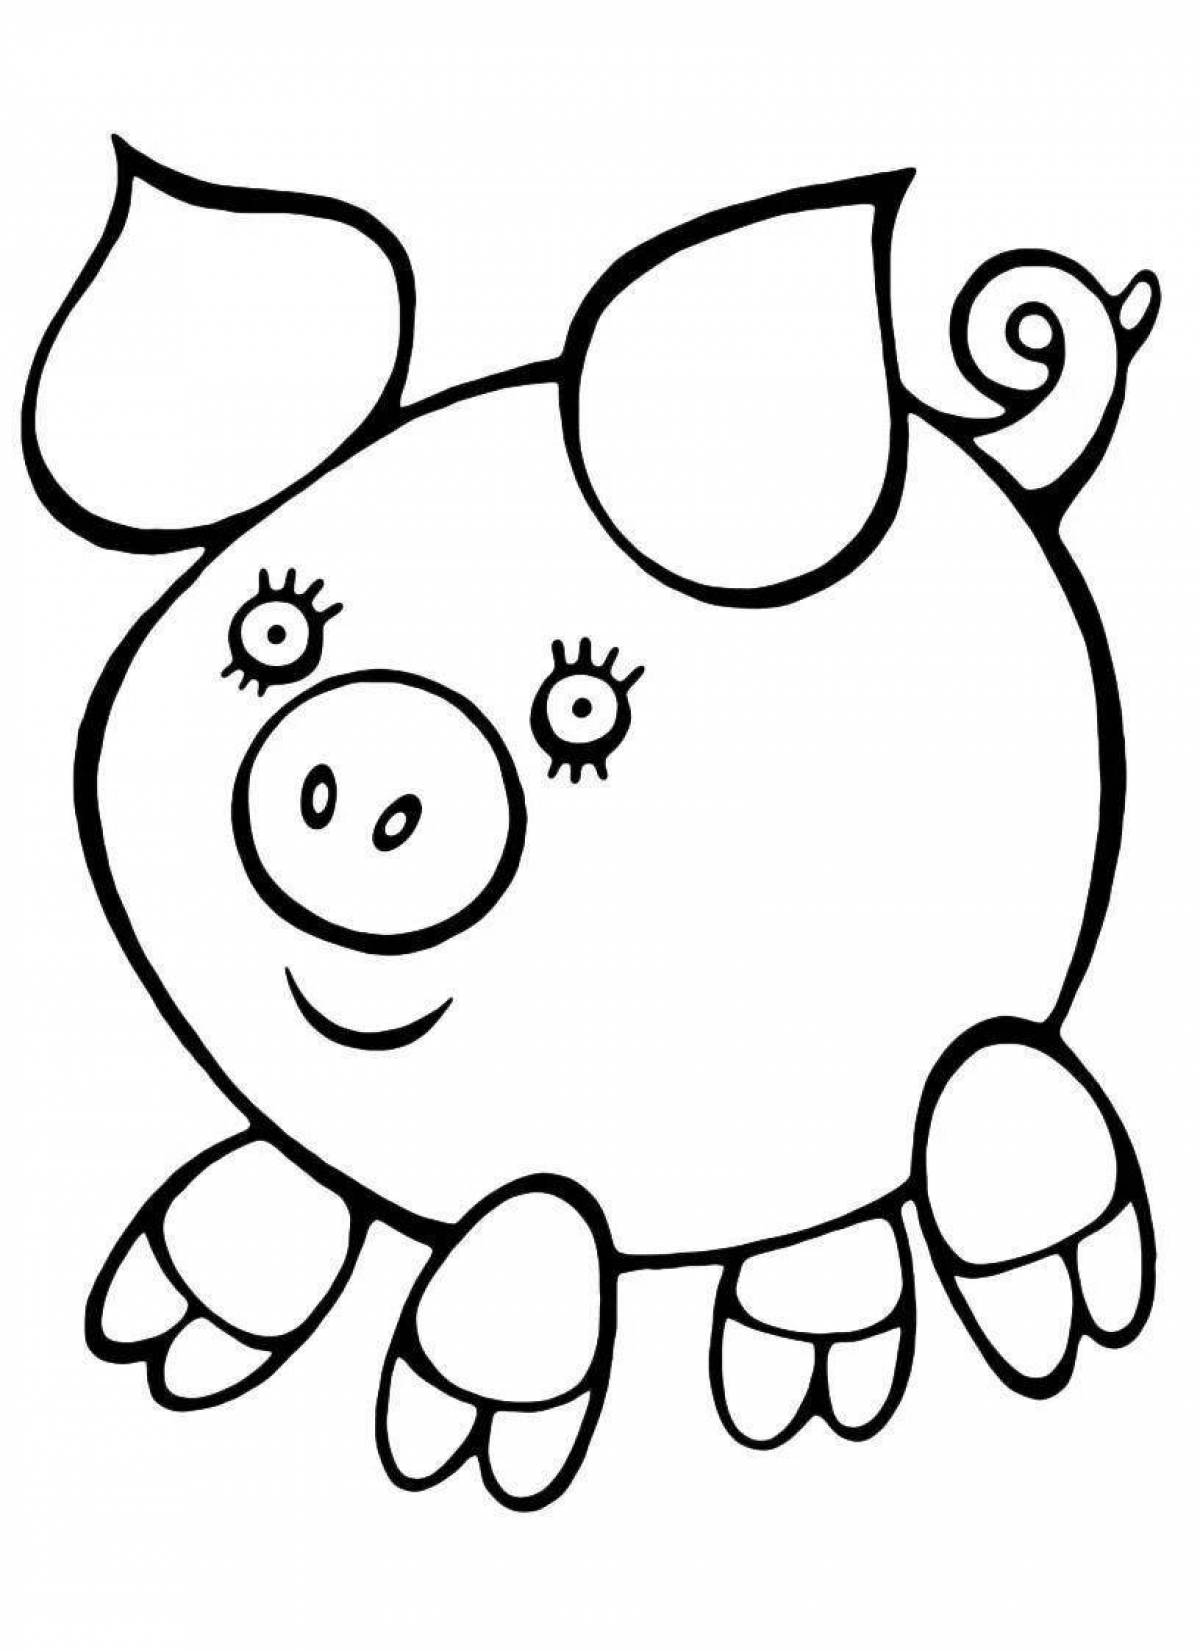 Playful 3 year old coloring book